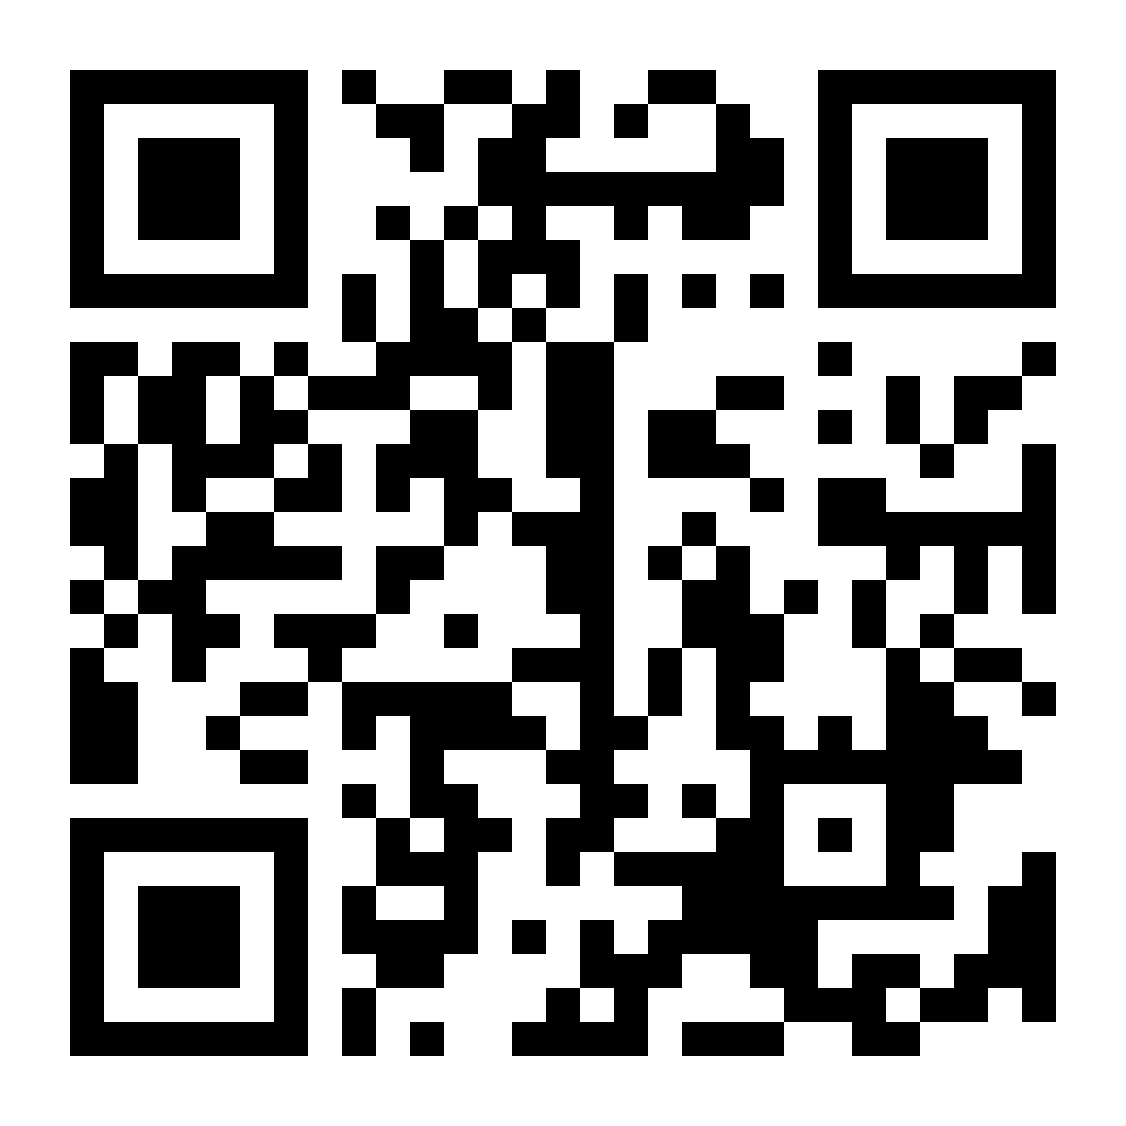 Scan this QR code to use Calm's mobile app.